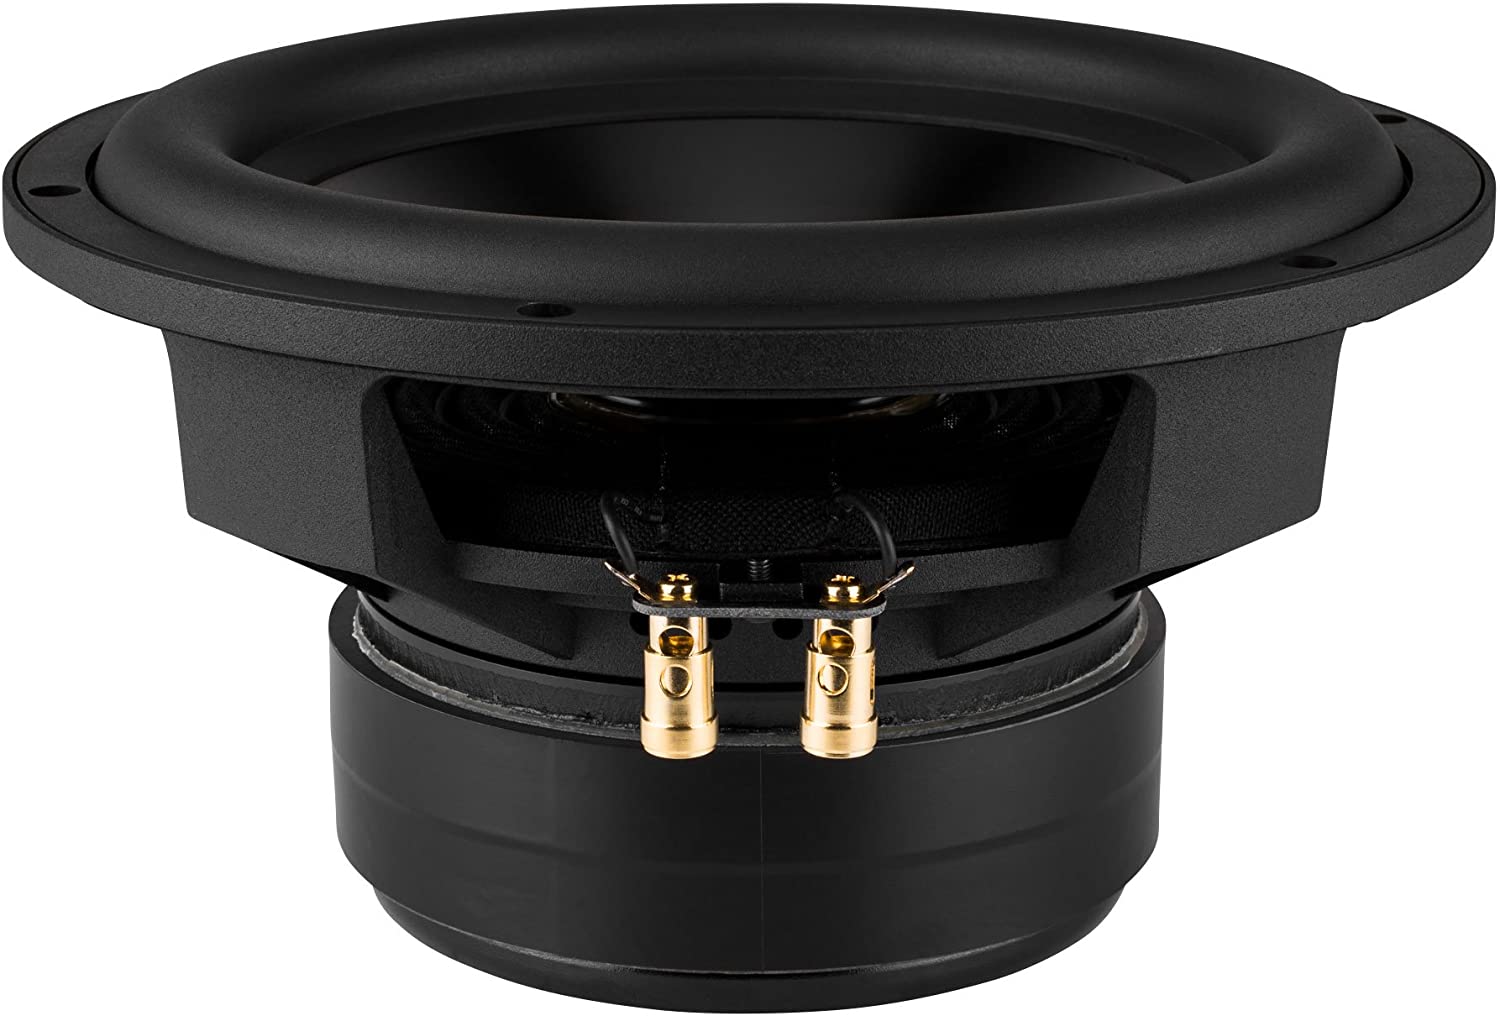 Best 10 Subwoofers For The Money Dayton Audio RSS265HO-44 Reference HO DVC Subwoofer